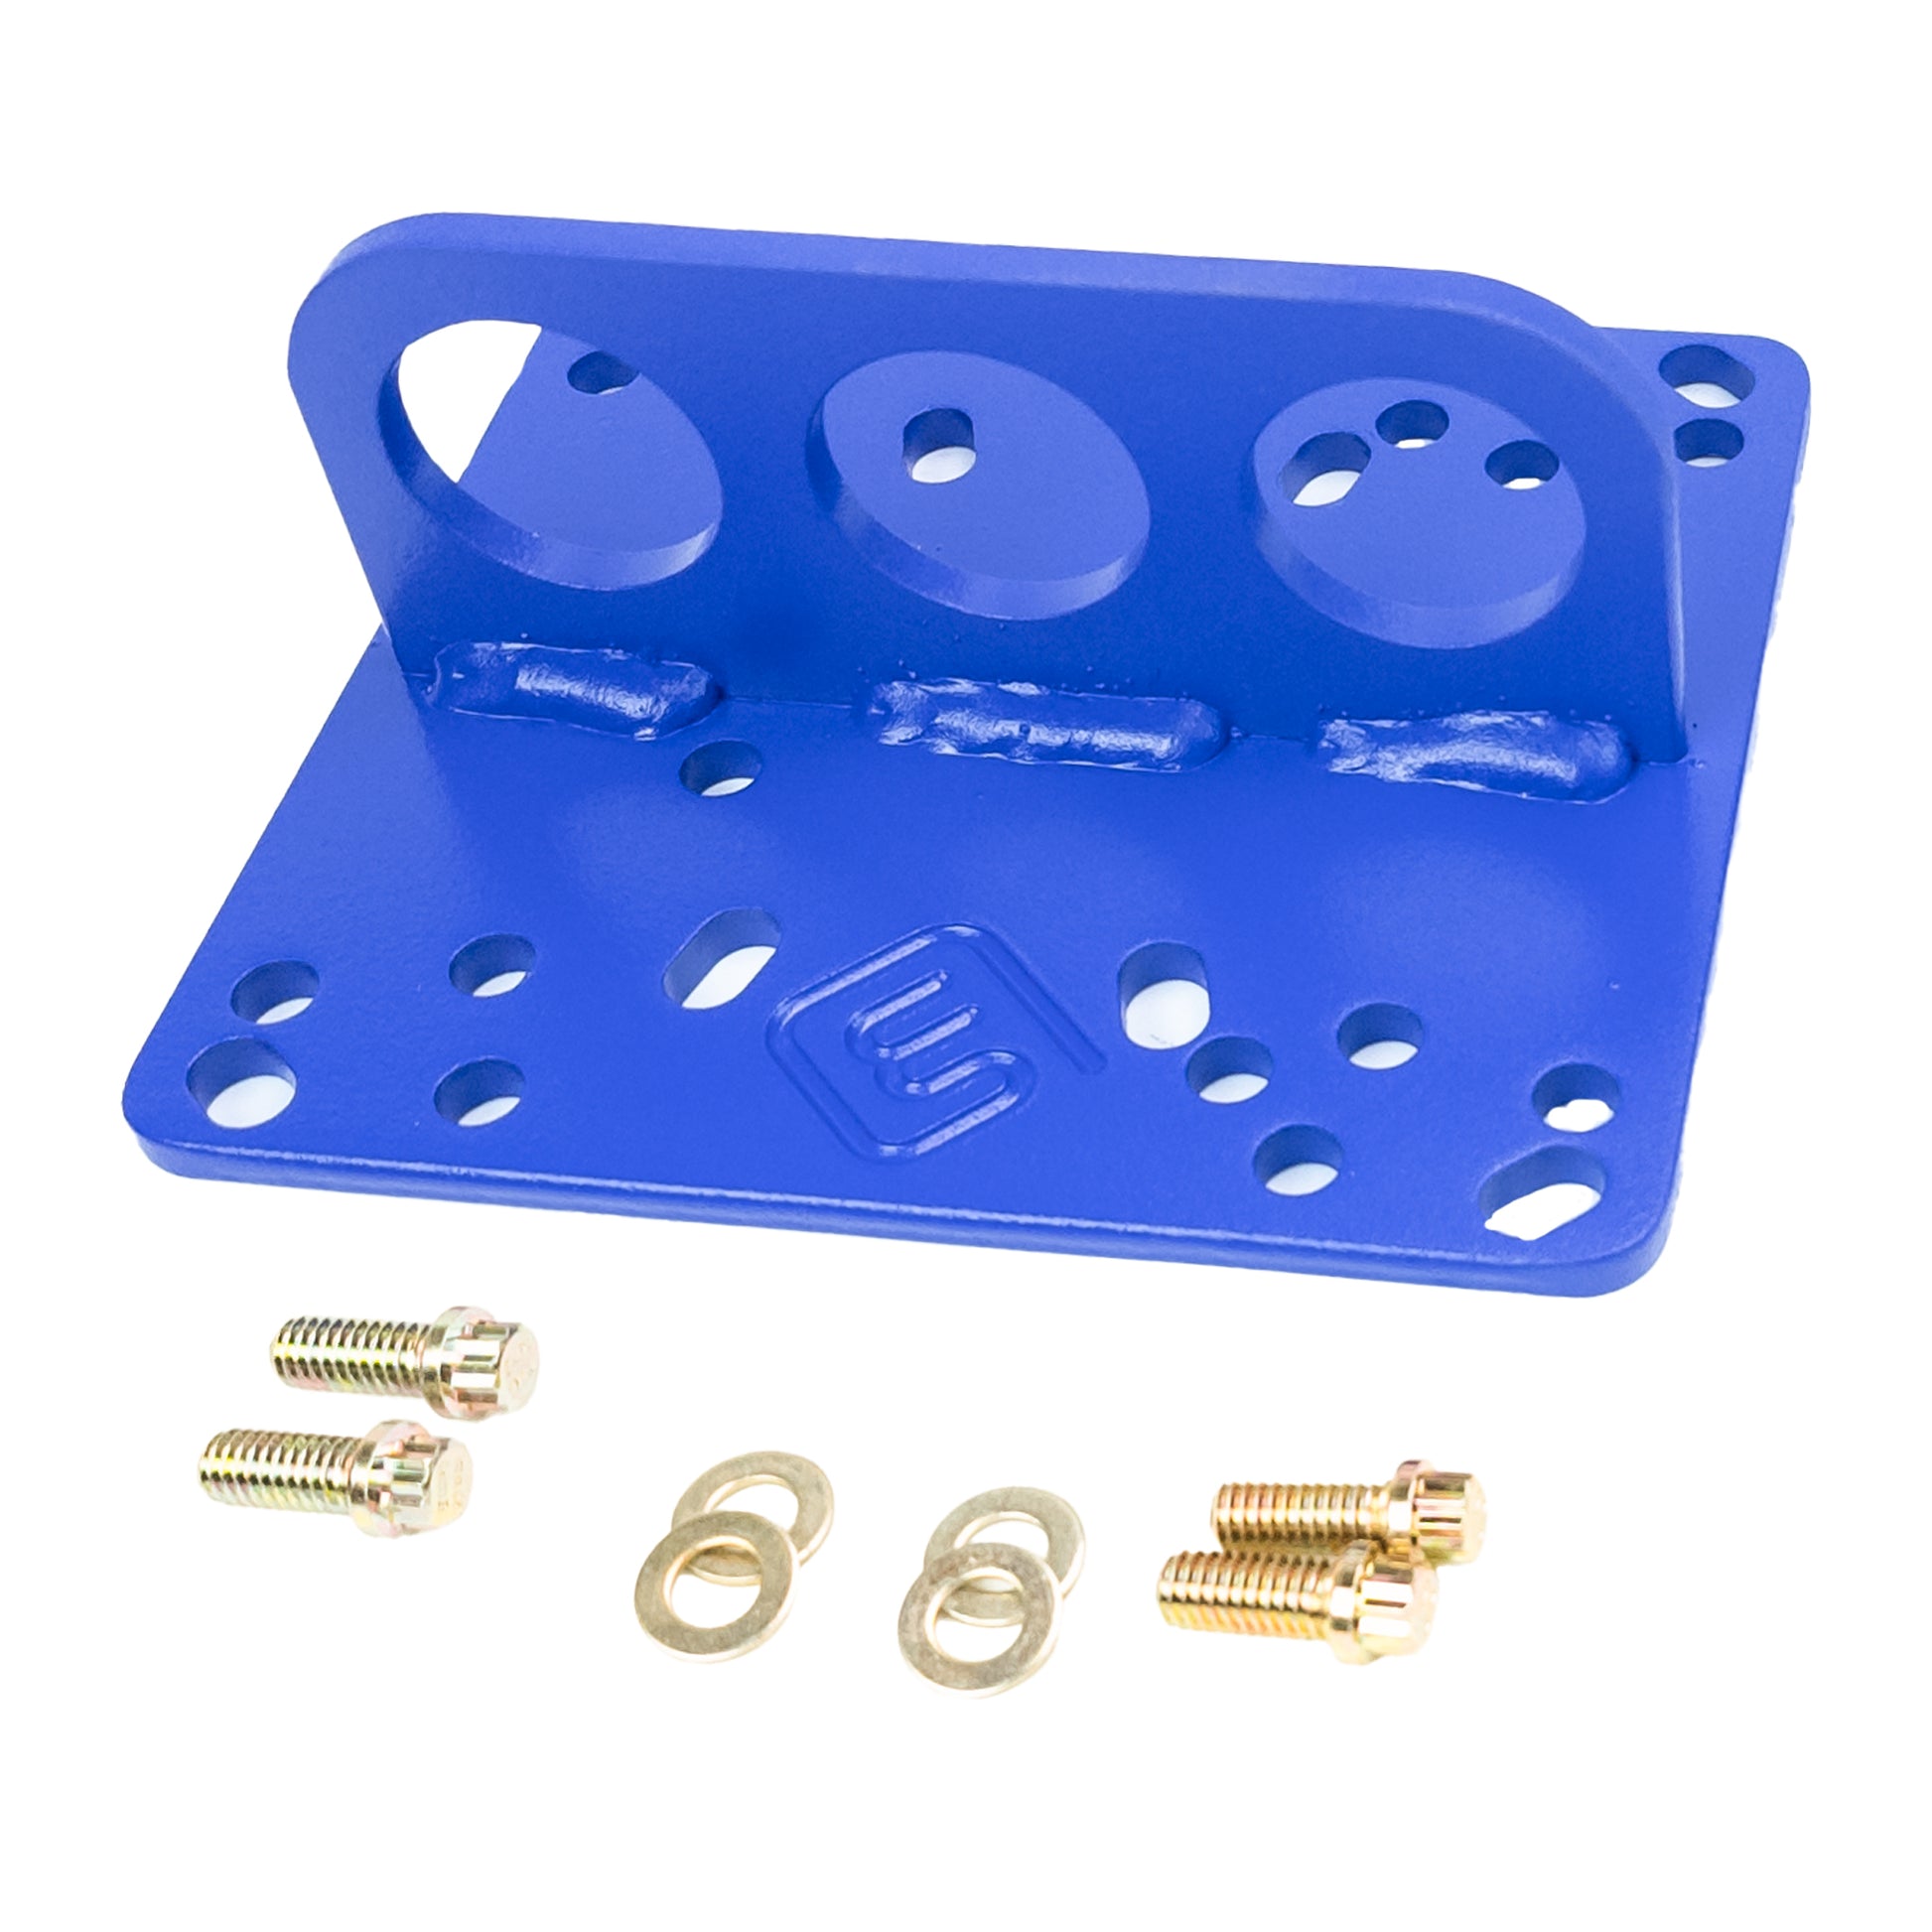 engineliftplates universal lift plate color FR blue